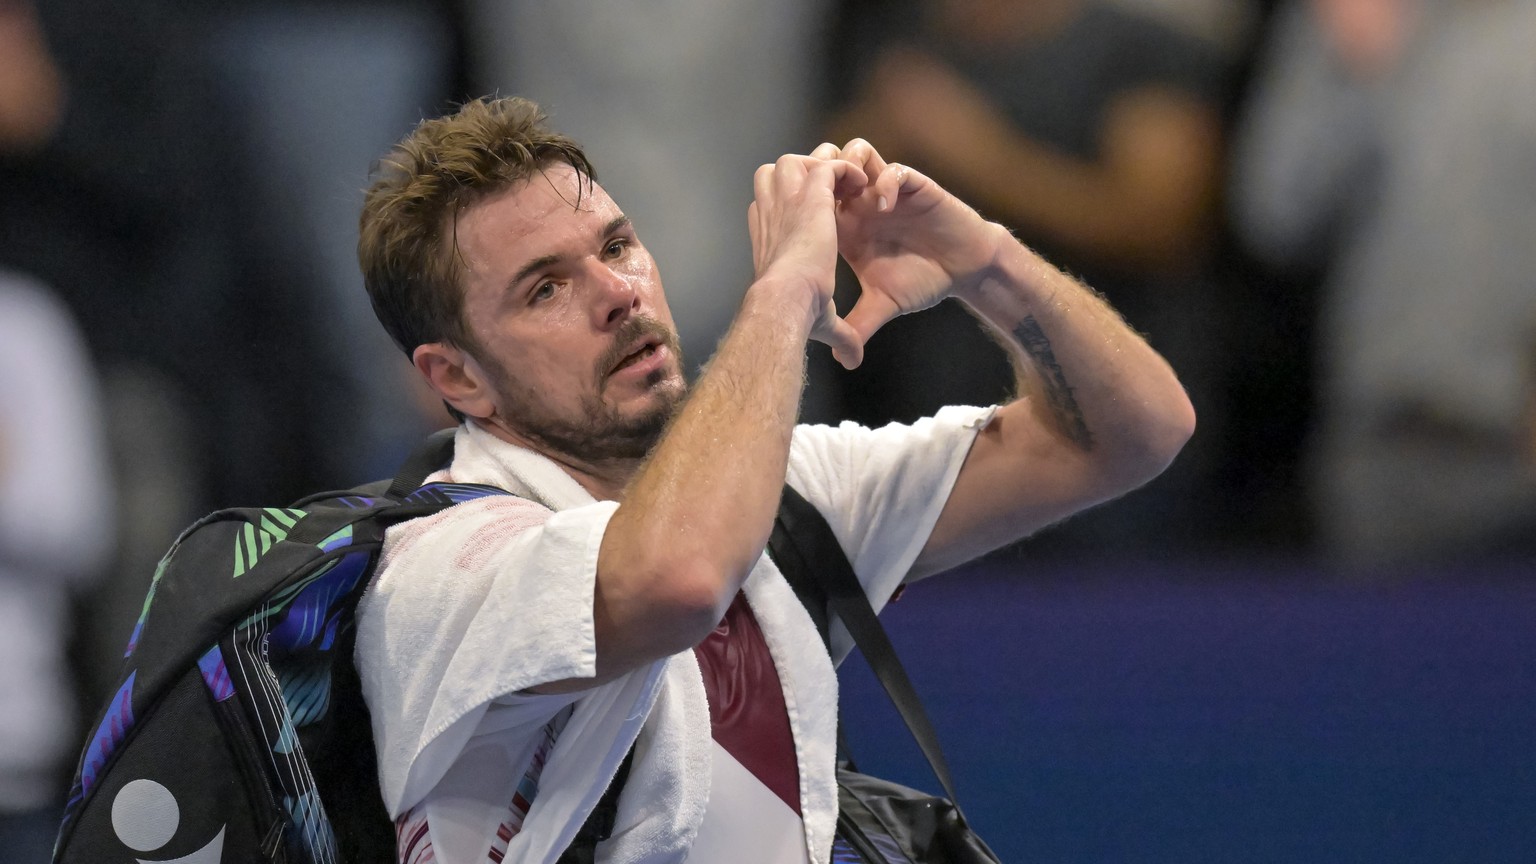 Switzerland&#039;s Stan Wawrinka gestures to the audience after losing his quarter final match against Spain&#039;s Roberto Bautista Agut at the Swiss Indoors tennis tournament at the St. Jakobshalle  ...